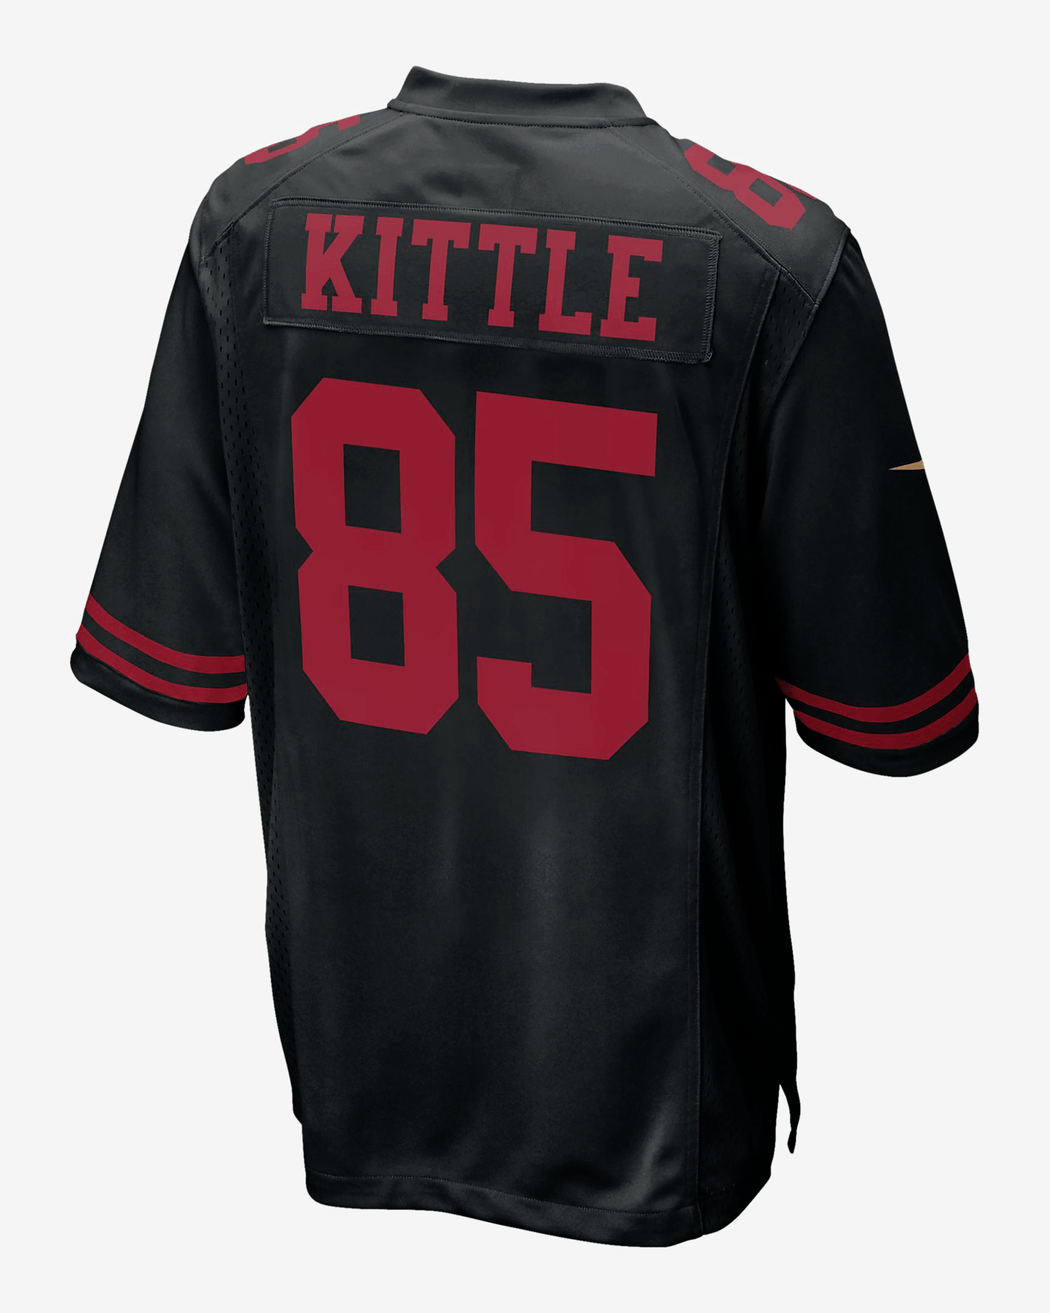 kittle throwback jersey